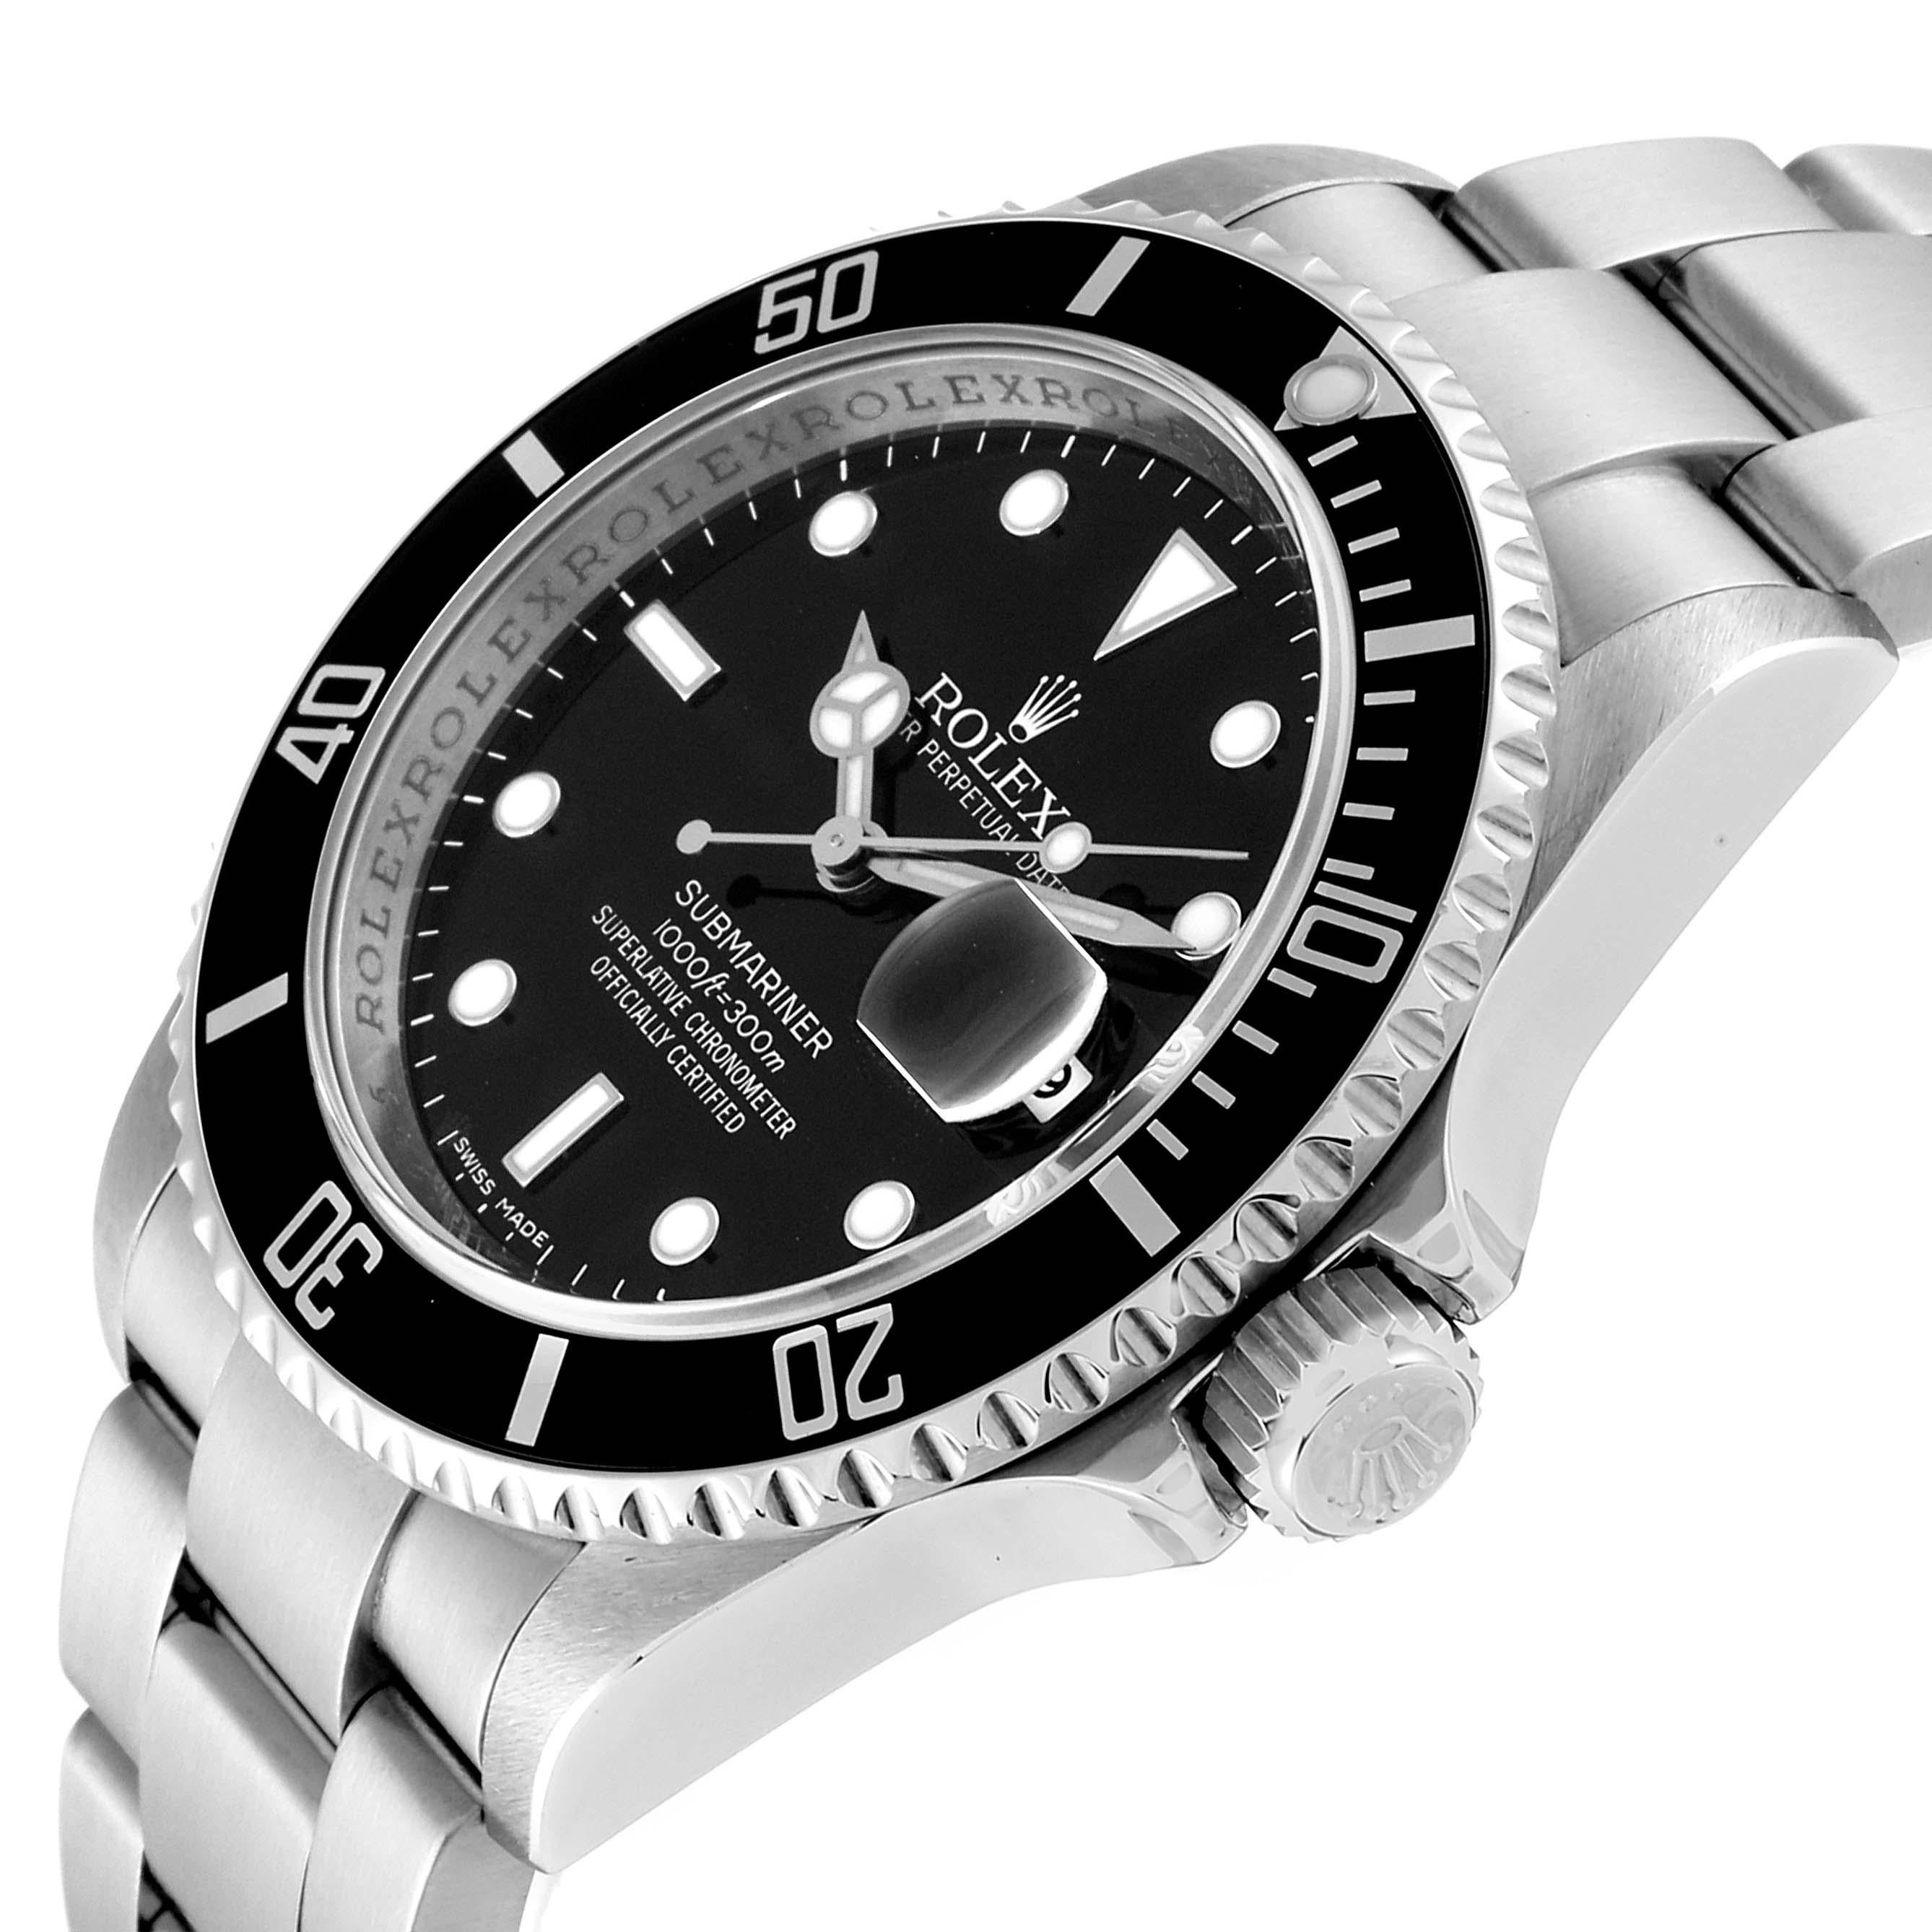 Rolex Submariner Date Stainless Steel Men's Watch 16610 Box Card For Sale 2